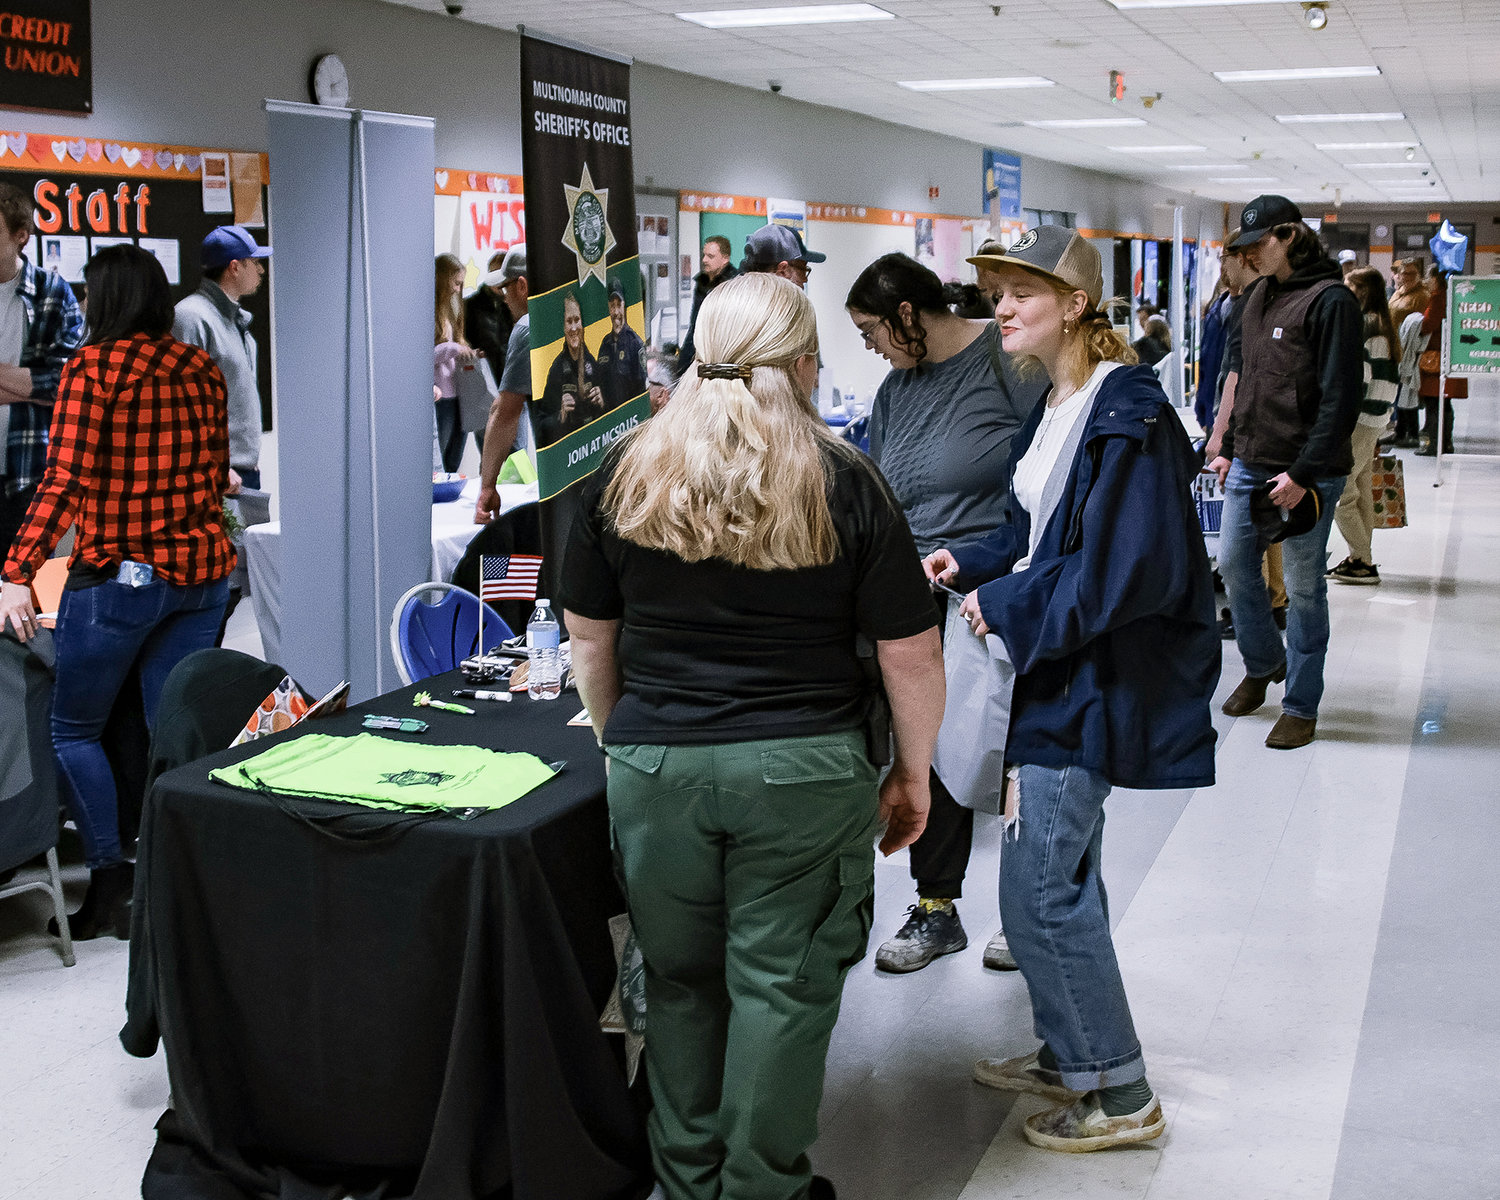 Rachel Wheeler, a recruiter for the Multnomah County Sheriff’s Office, left, speaks with a graduate of Battle Ground High School about employment opportunities during the Industry Fair on Thursday, Feb. 16.